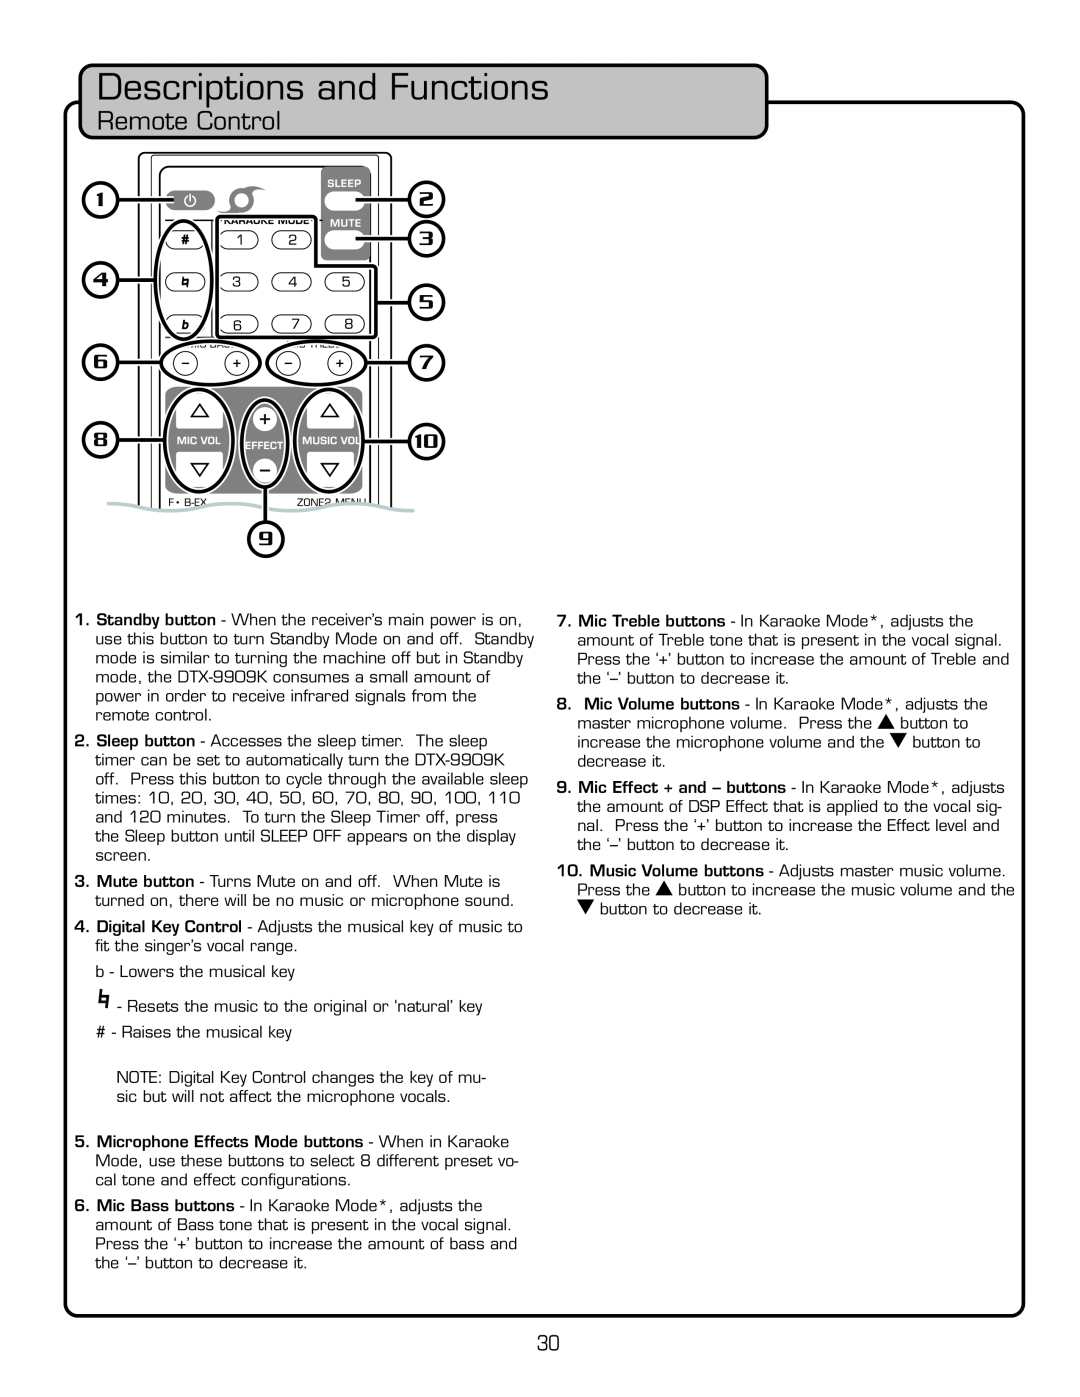 VocoPro DTX-9909K owner manual Descriptions and Functions, screen 